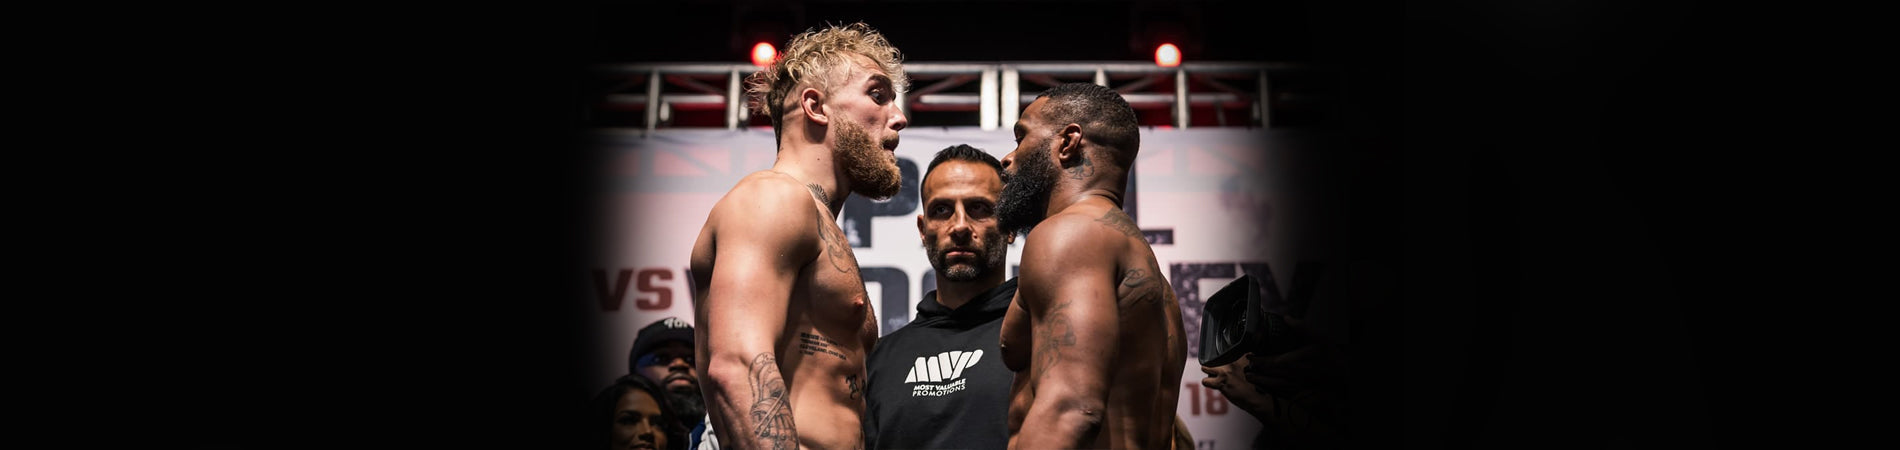 $500k Bonus Confirmed by Jake Paul If Tyron Woodley Wins by Knockout in this Weekend’s Rematch